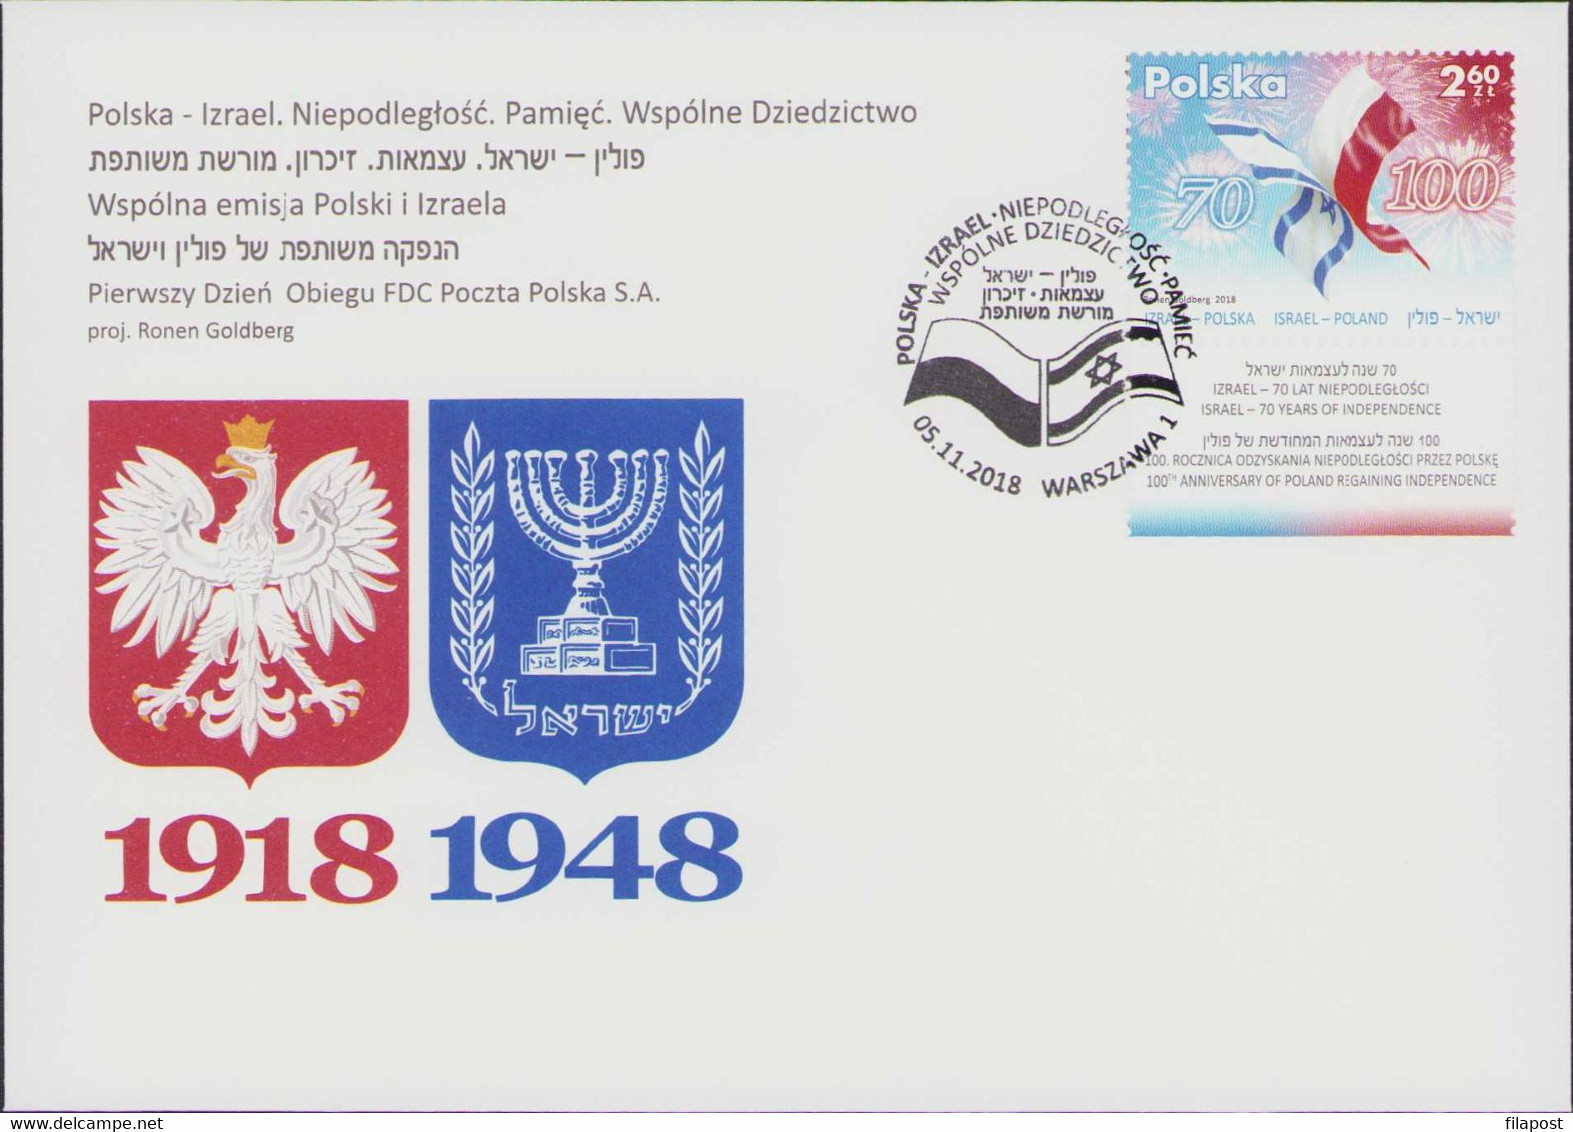 2018 Poland - Israel Joint Issue Booklet Mi 5034 Flag Independence / Memory Common Heritage, FDC + 2 Stamps MNH** FV - Carnets